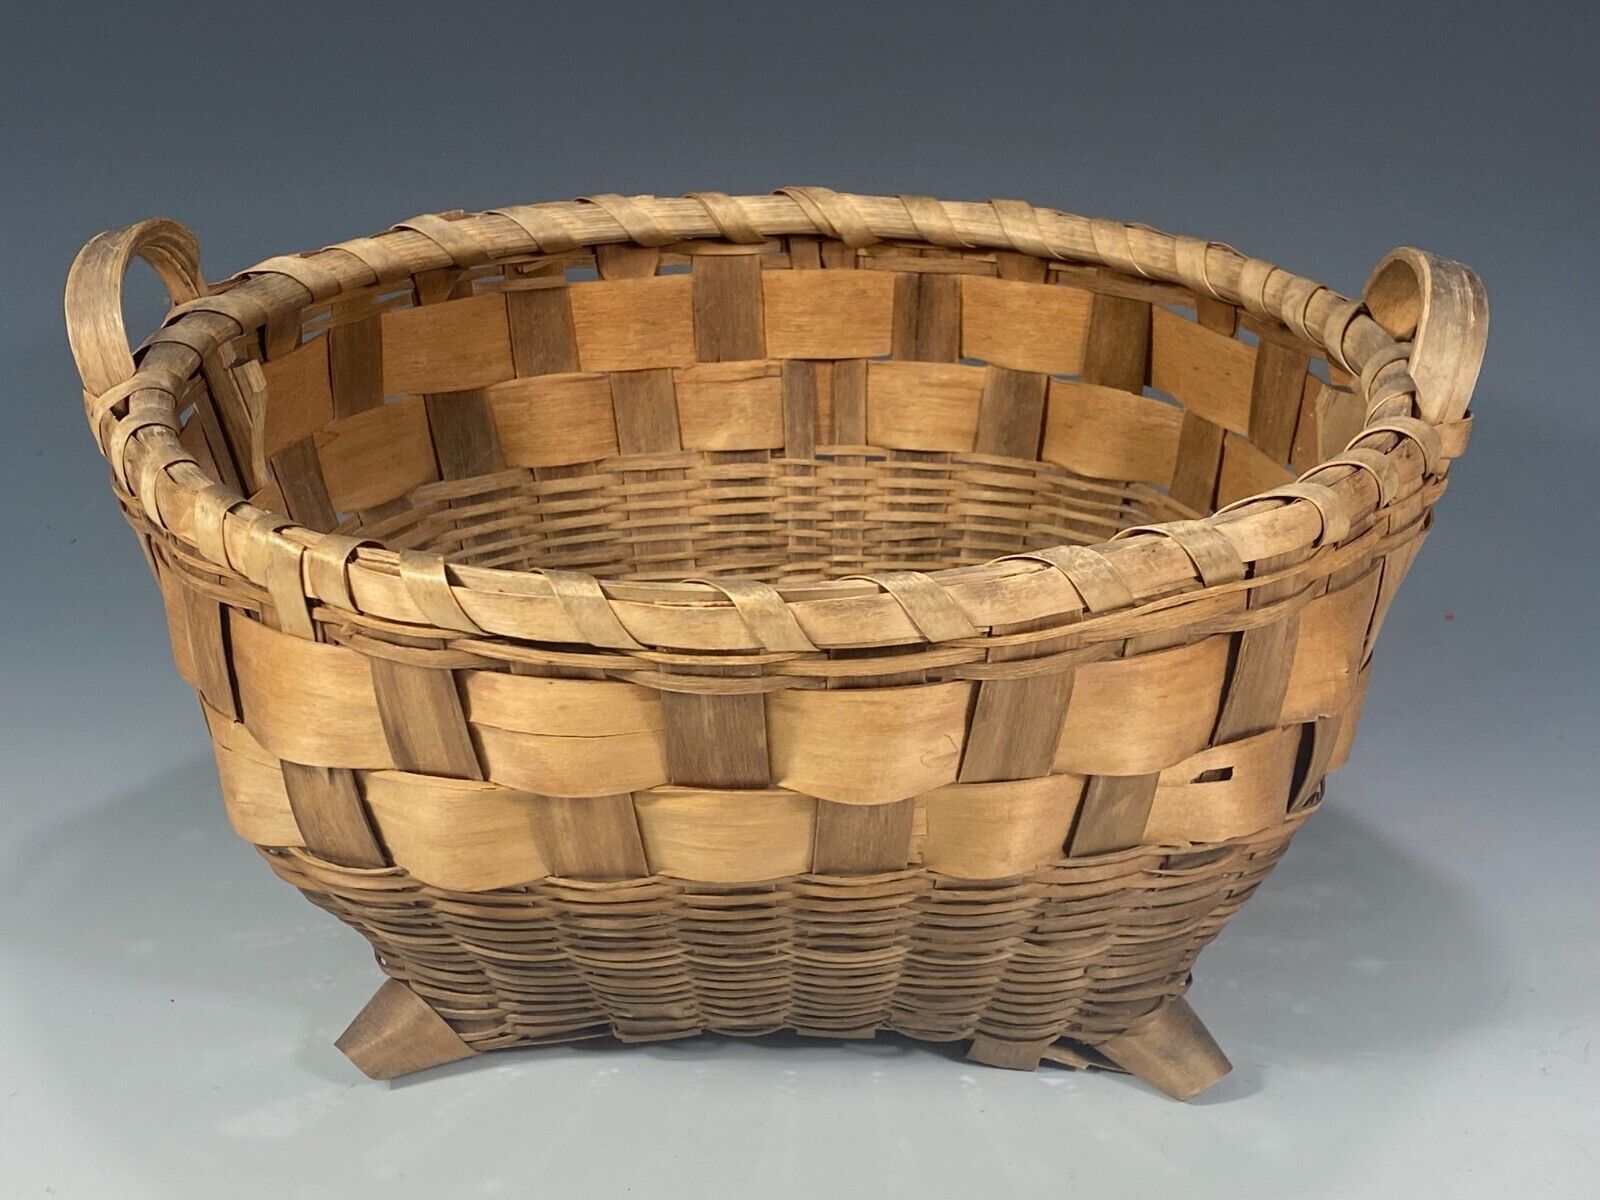 Fine Rare American North East Footed & Handled Woven Basket ca 19-20th century